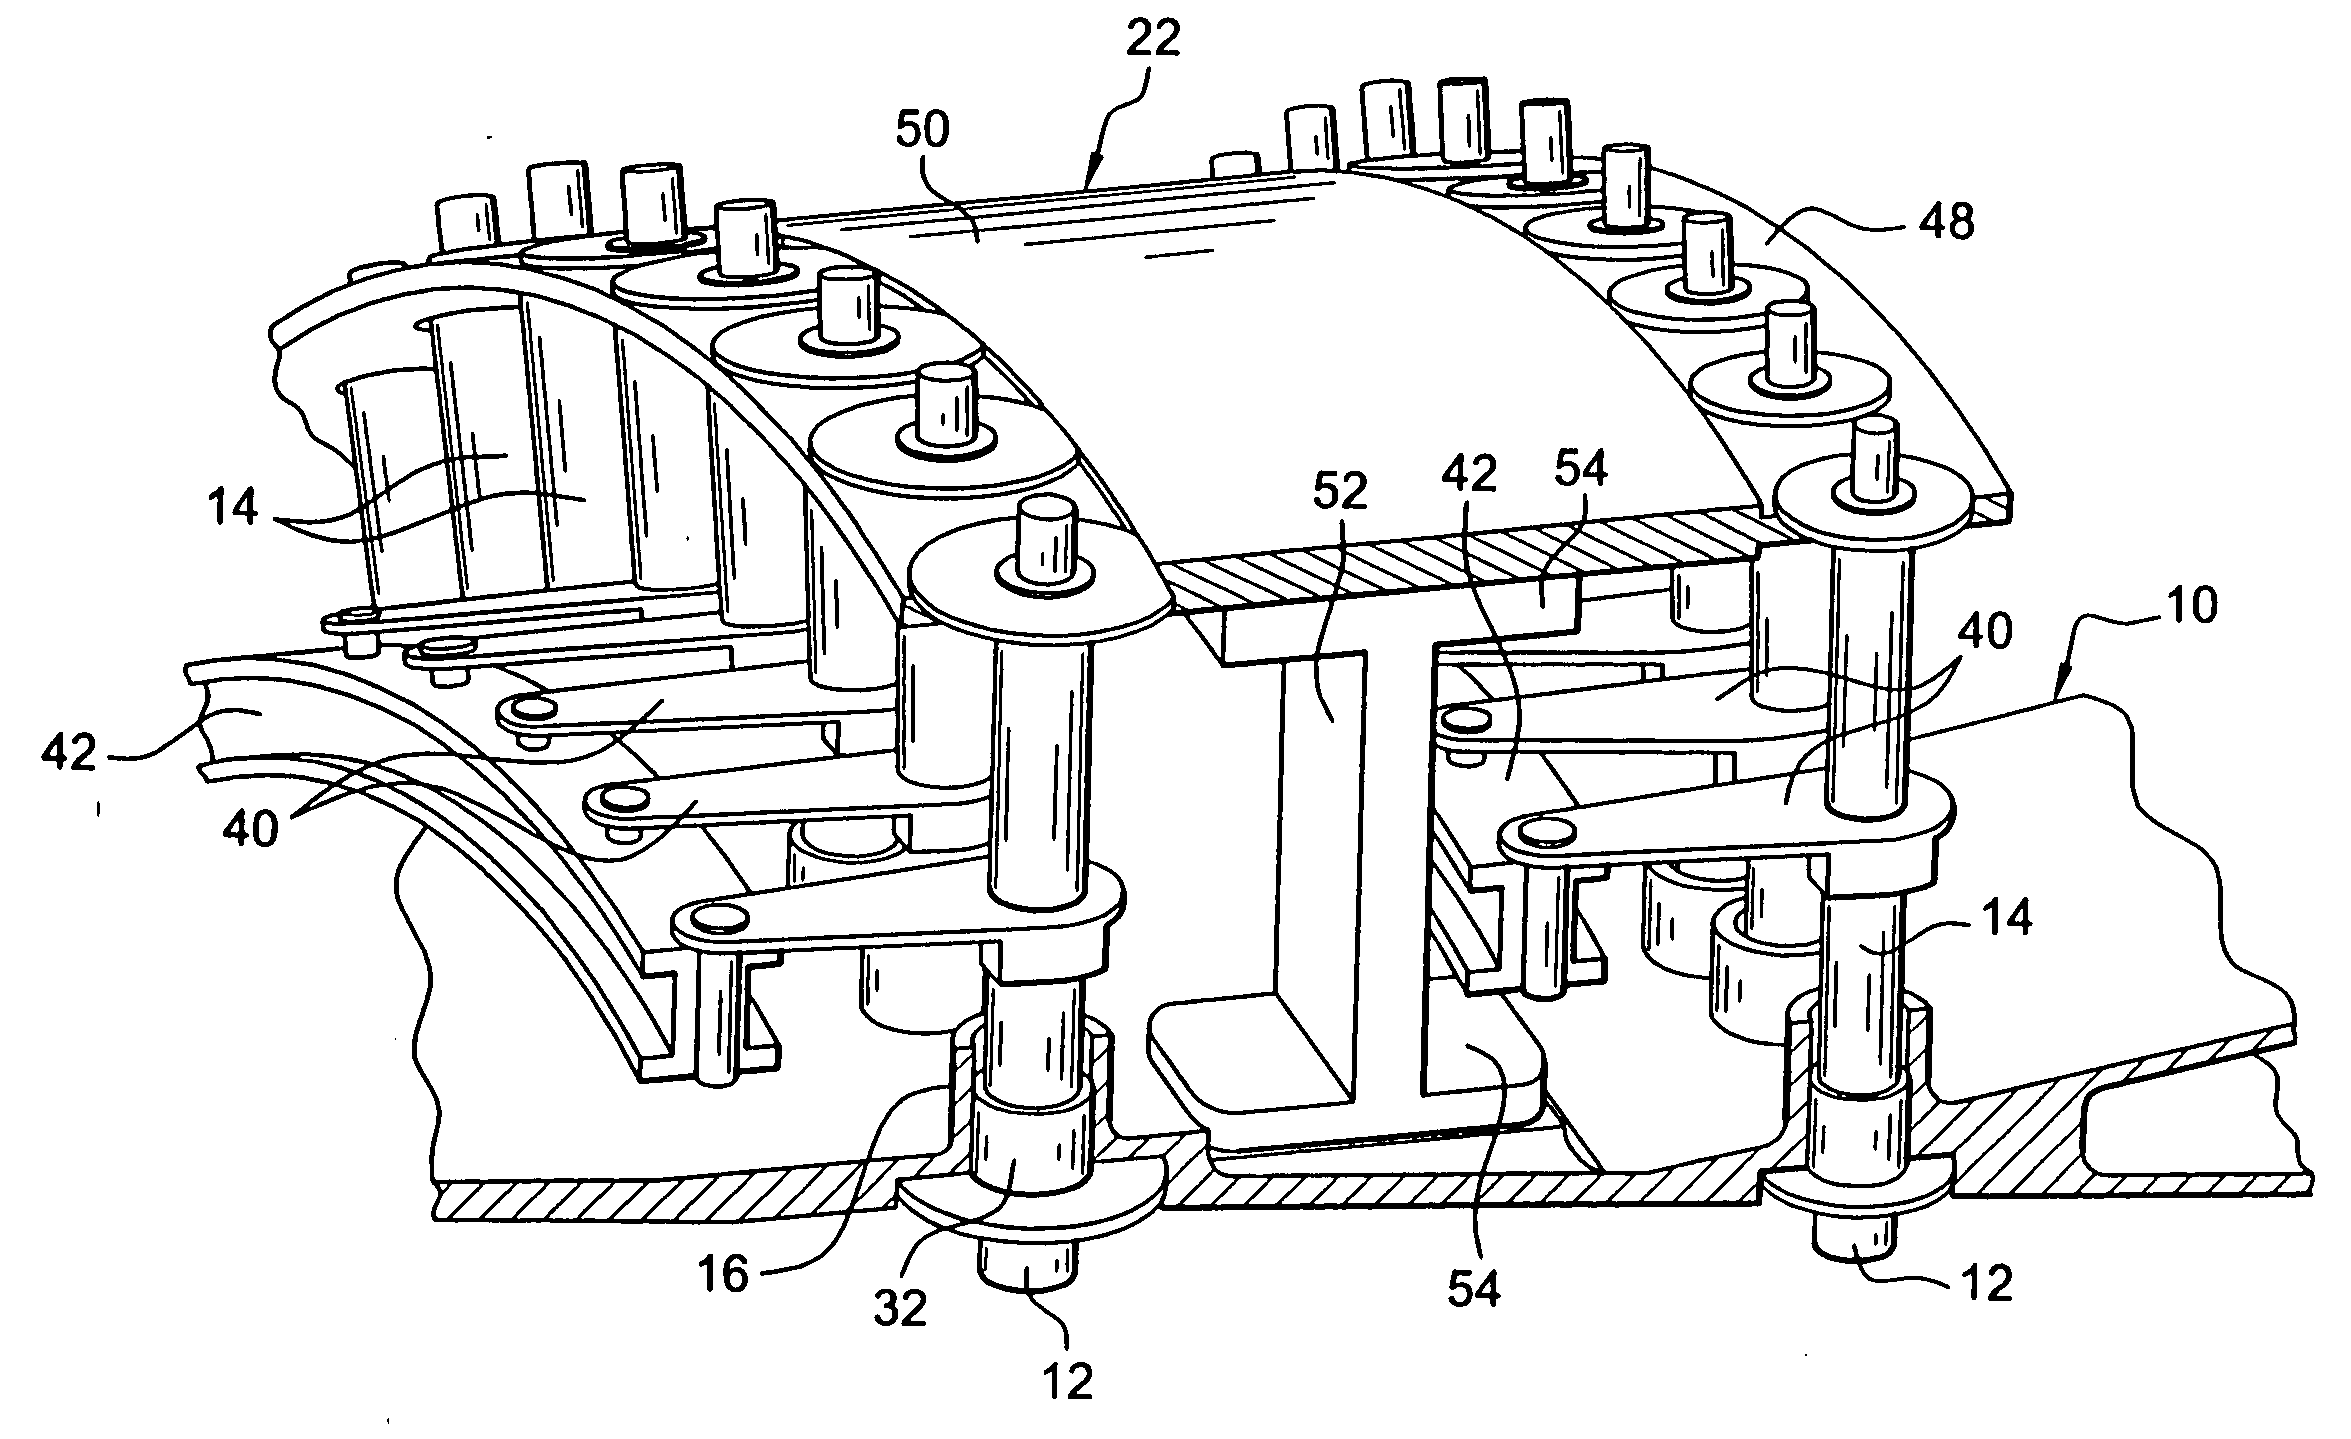 Device for pivotally guiding variable-pitch vanes in a turbomachine